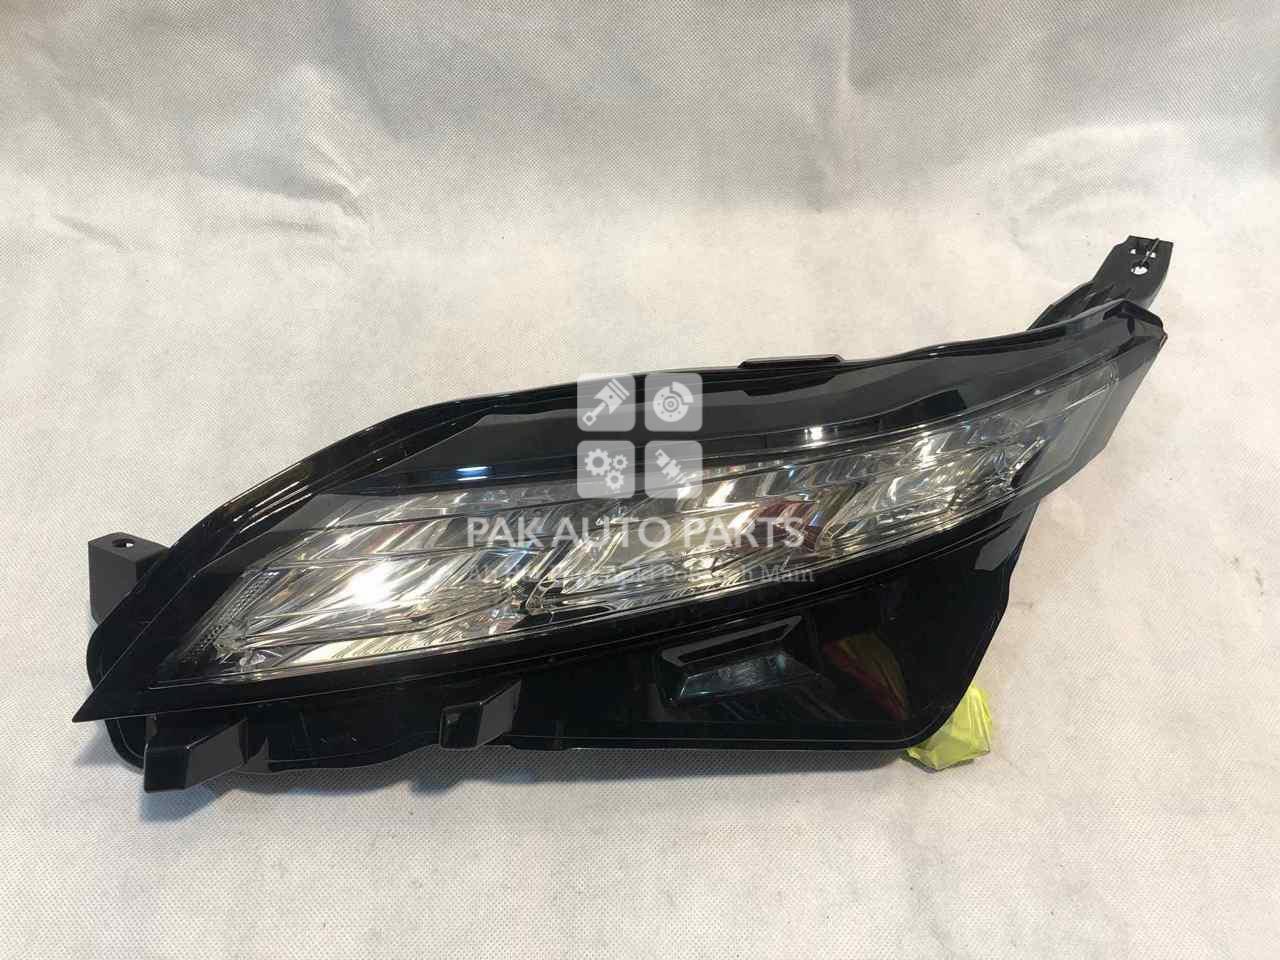 Picture of Nissan Dayz Highway Star 2020 Left Side Headlight